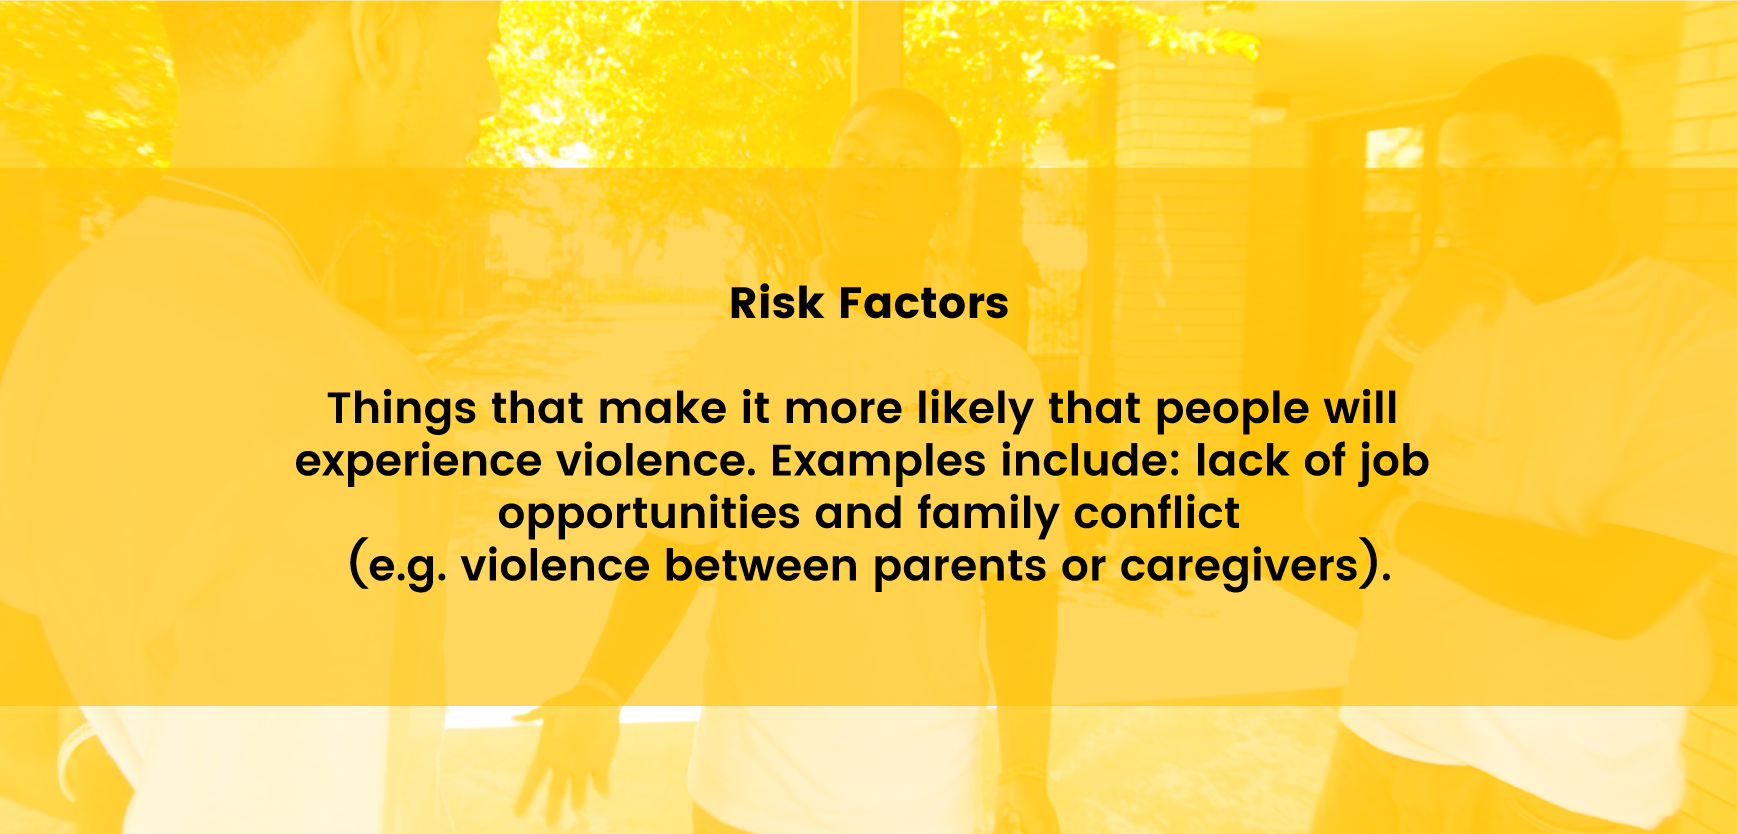 Risk Factors - Things that make it more likely that people will experience violence. Examples include: lack of job opportunities and family conflict (e.g. violence between parents or caregivers).